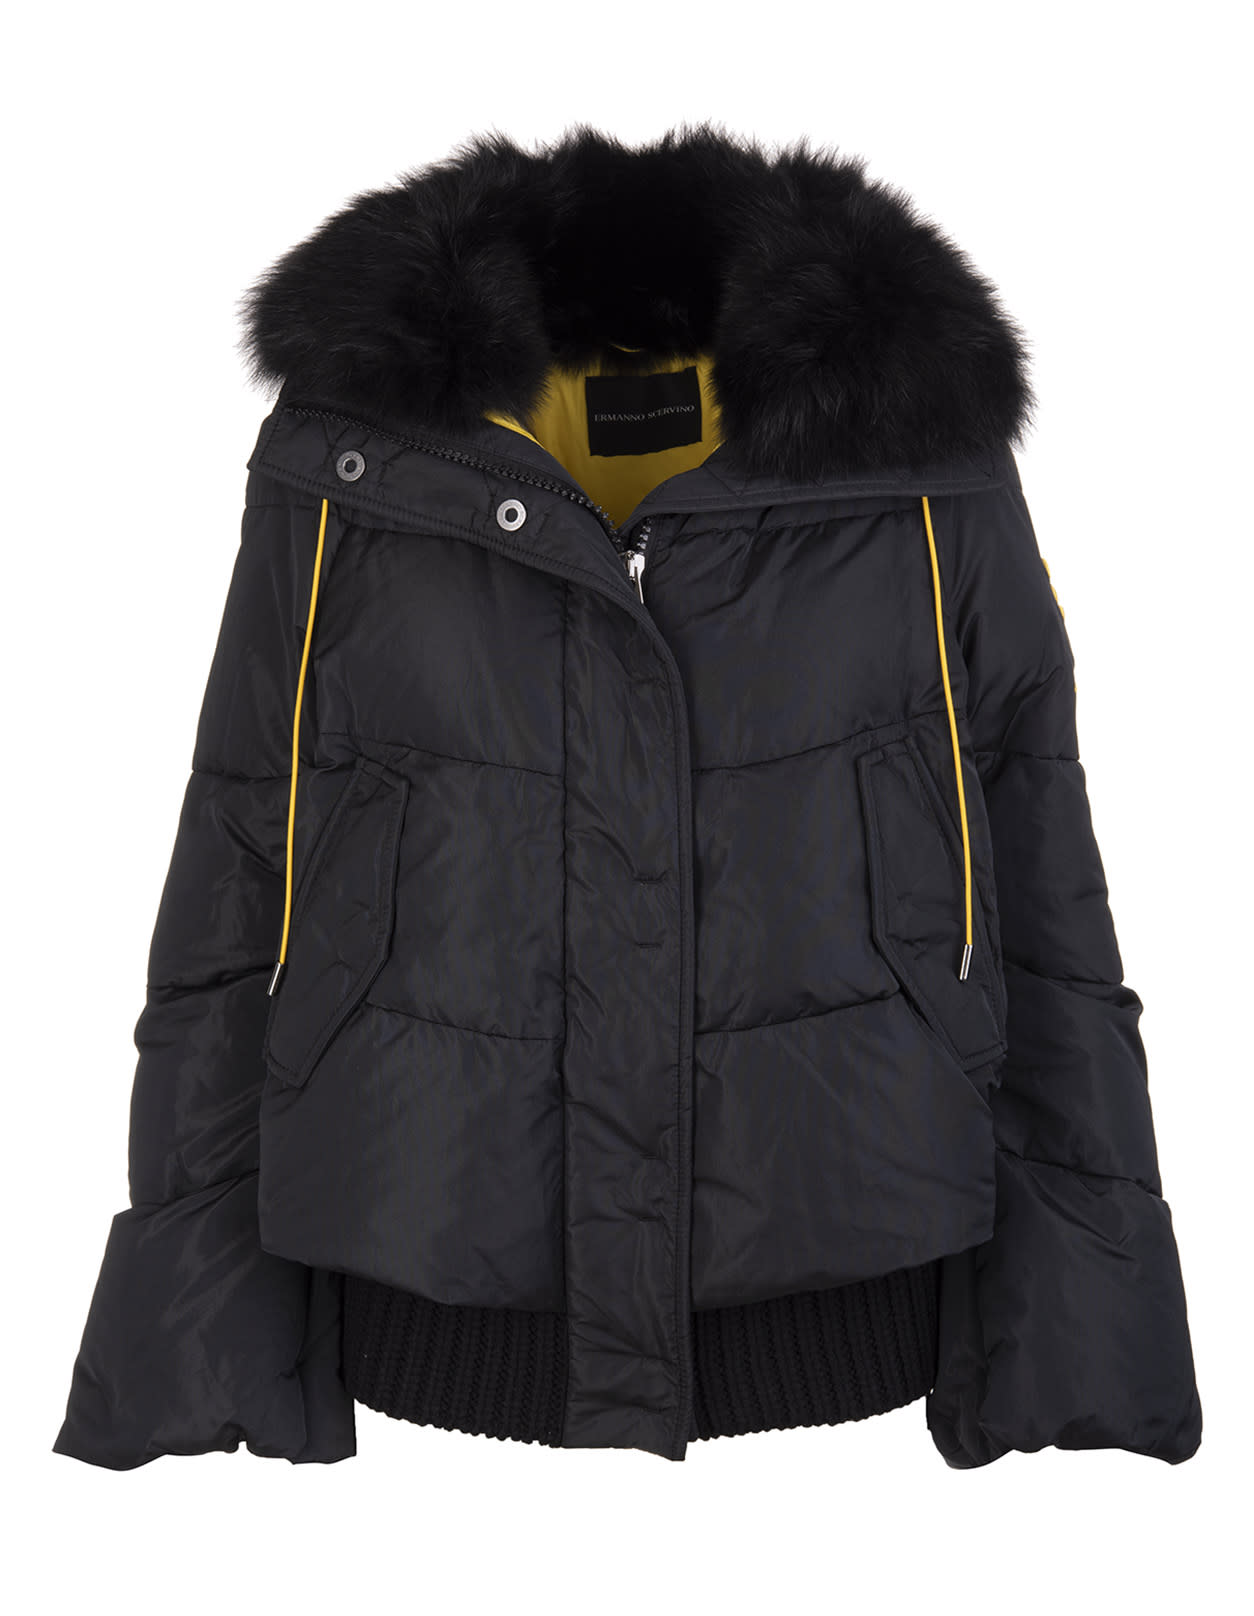 Ermanno Scervino Black And Yellow Short Down Jacket In Taffeta And Nylon With Fox Fur